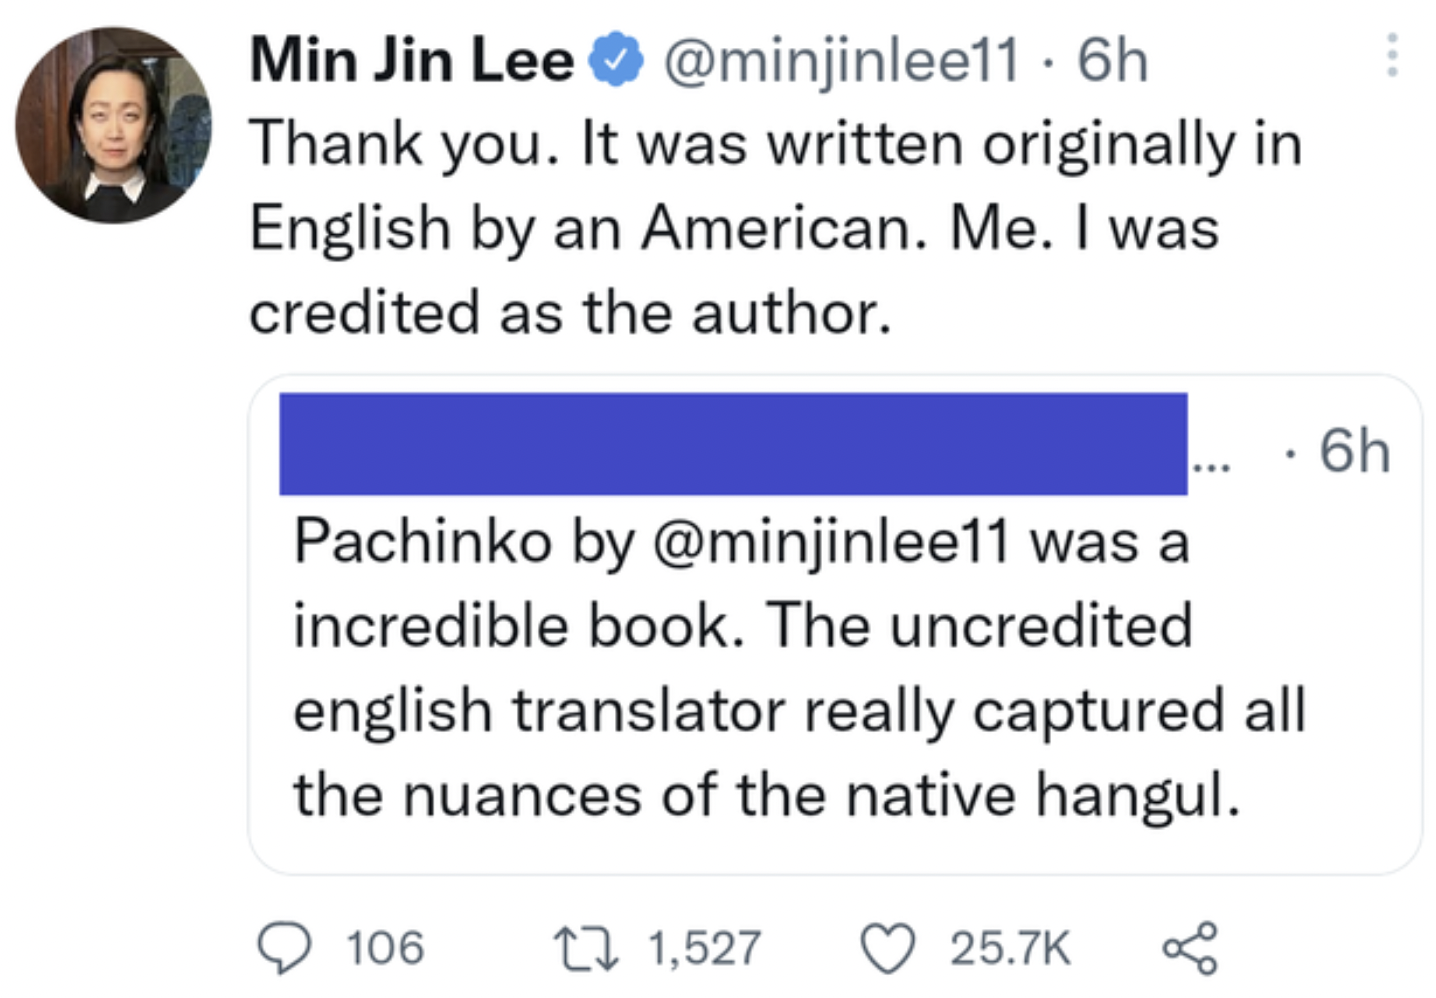 Cringey Pics - hank you. It was written originally in English by an American. Me. I was credited as the author. Pachinko by was a incredible book. The uncredited english translator really captured all the nuances of the native hangul